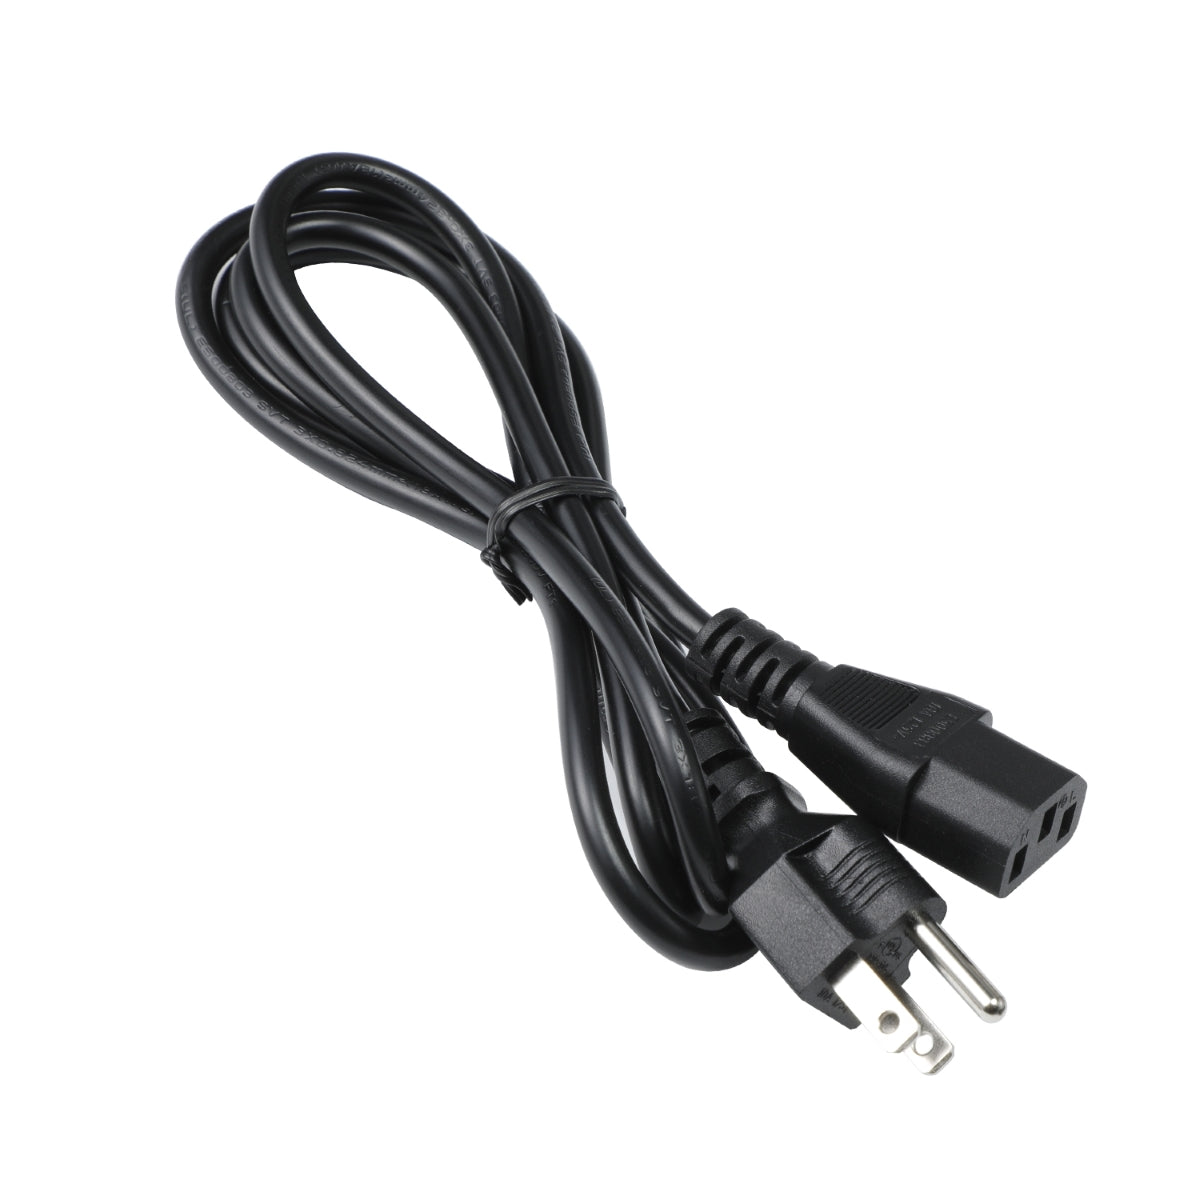 Power Cord for Acer KG241Q Monitor.